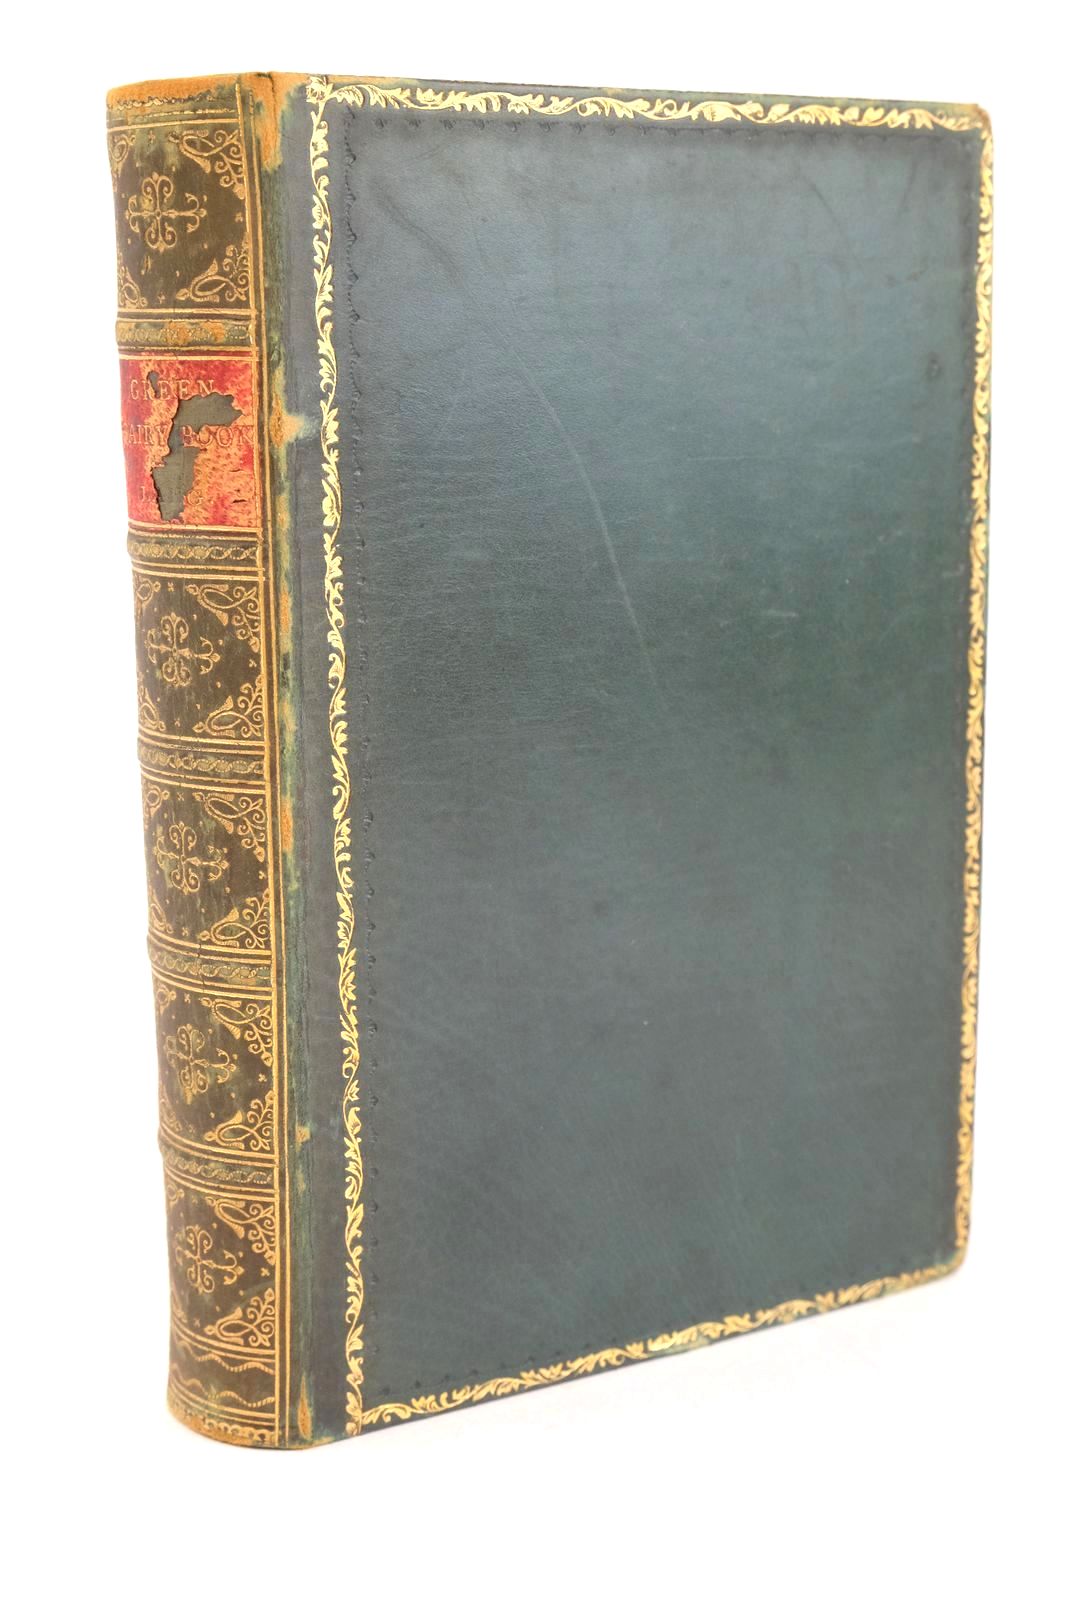 Photo of THE GREEN FAIRY BOOK- Stock Number: 1327888